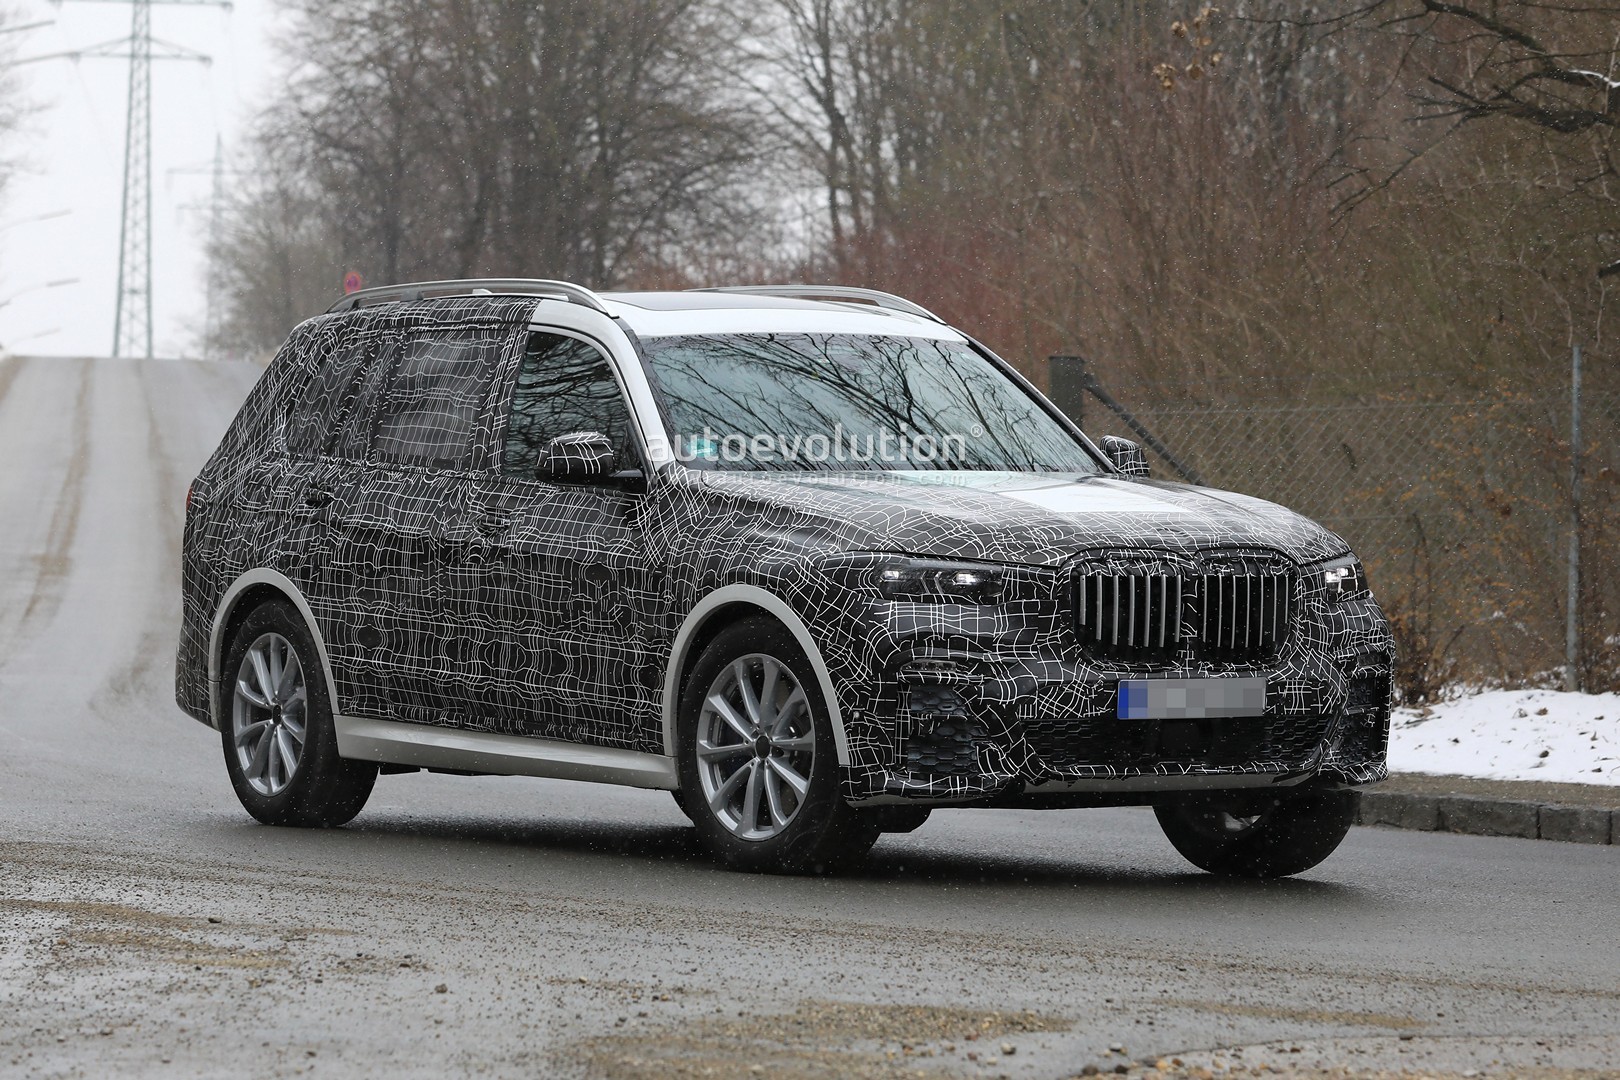 Spyshots: Likely BMW X7 M50i Shows the M Look - autoevolution